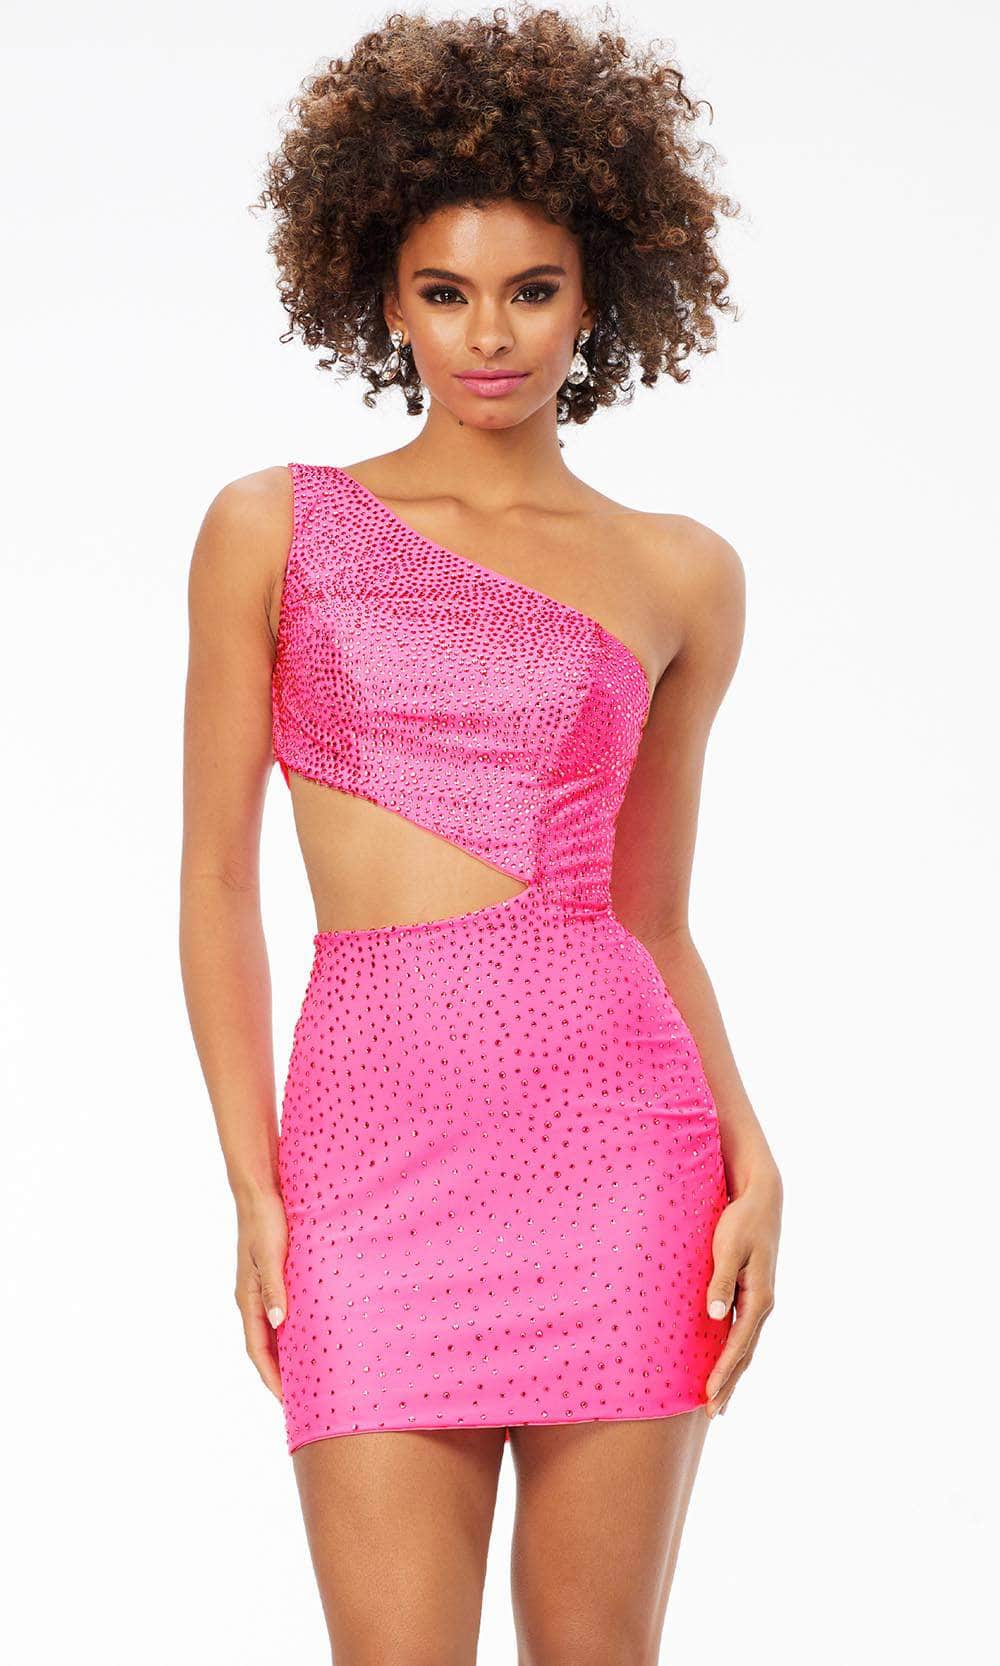 Ashley Lauren 4533 - One Sleeve Het Set Stone Cocktail Dress Special Occasion Dress 0 / Hot Pink